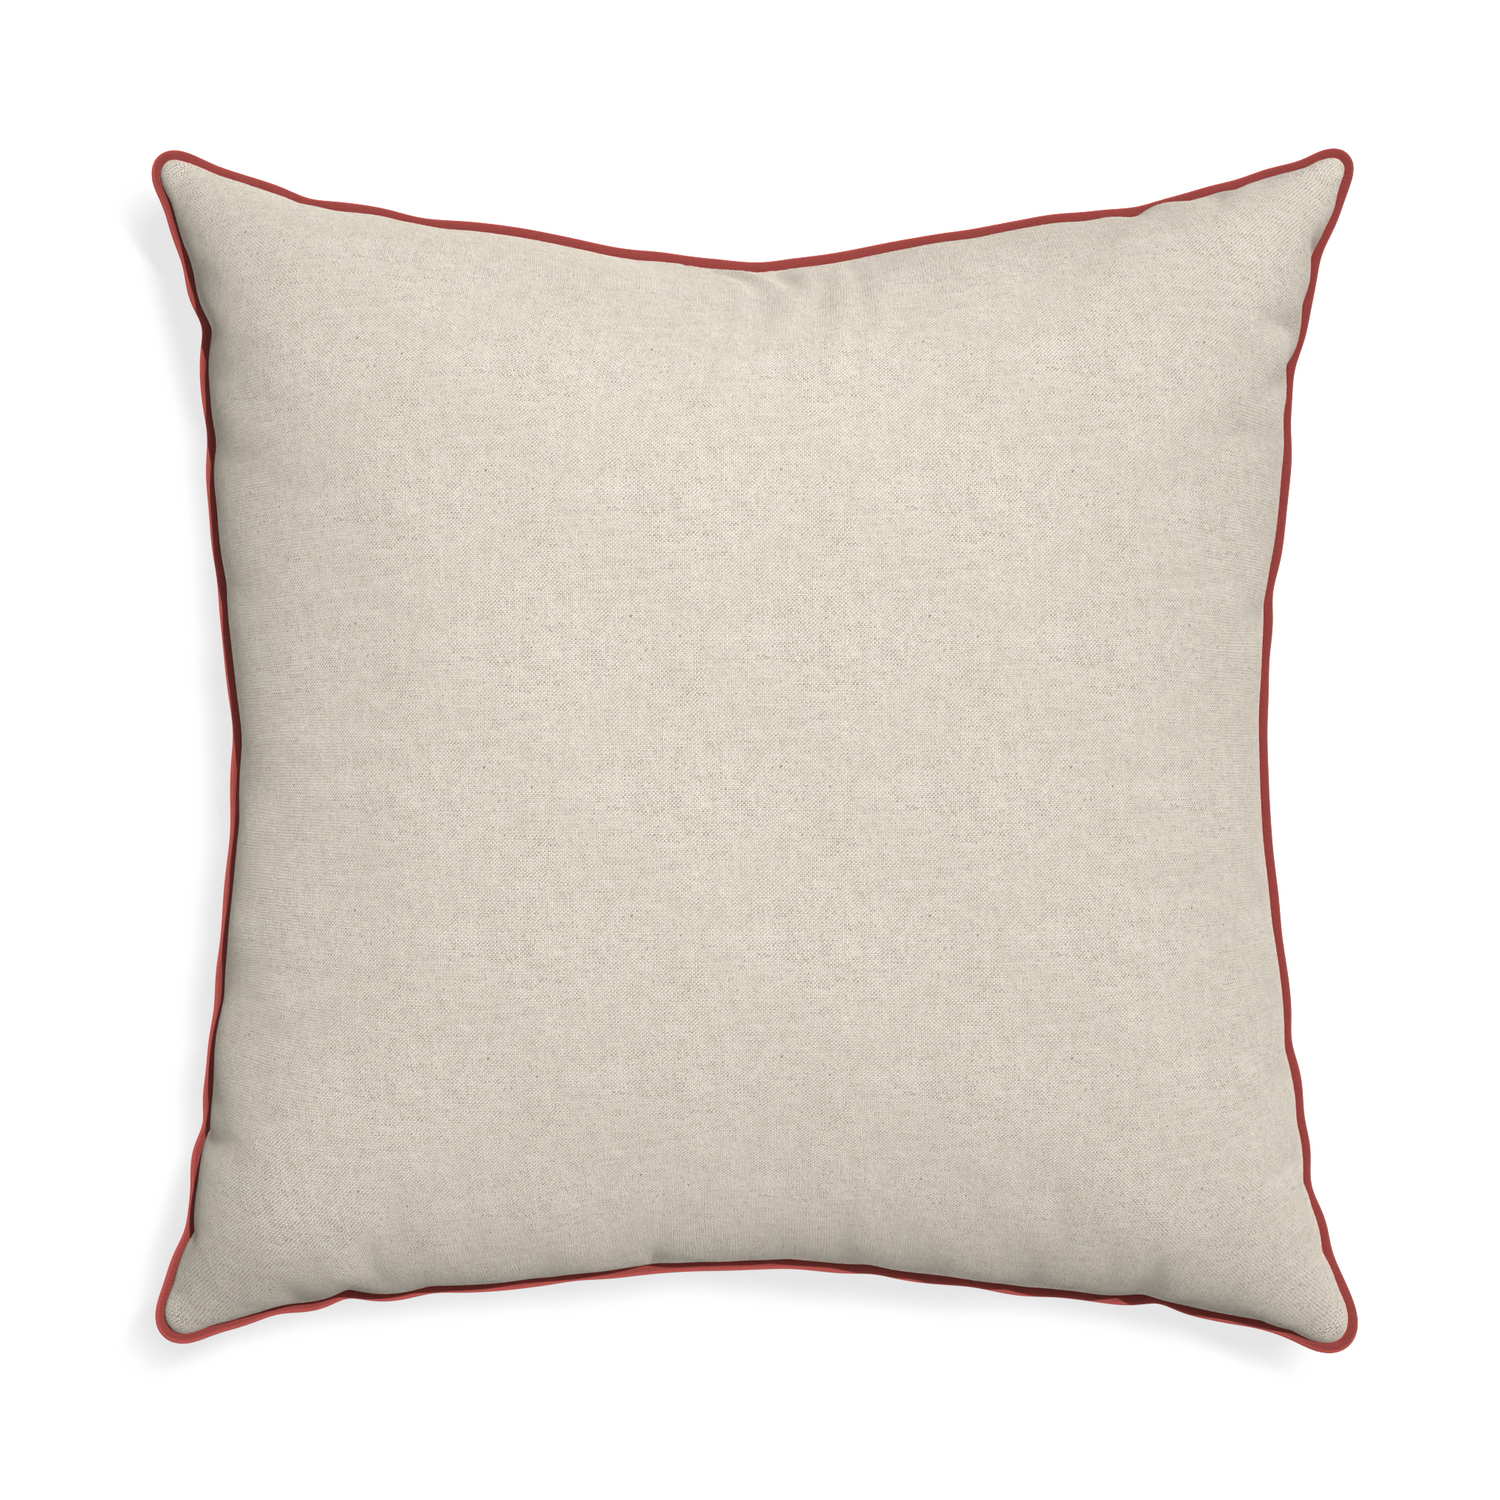 Euro-sham oat custom light brownpillow with c piping on white background